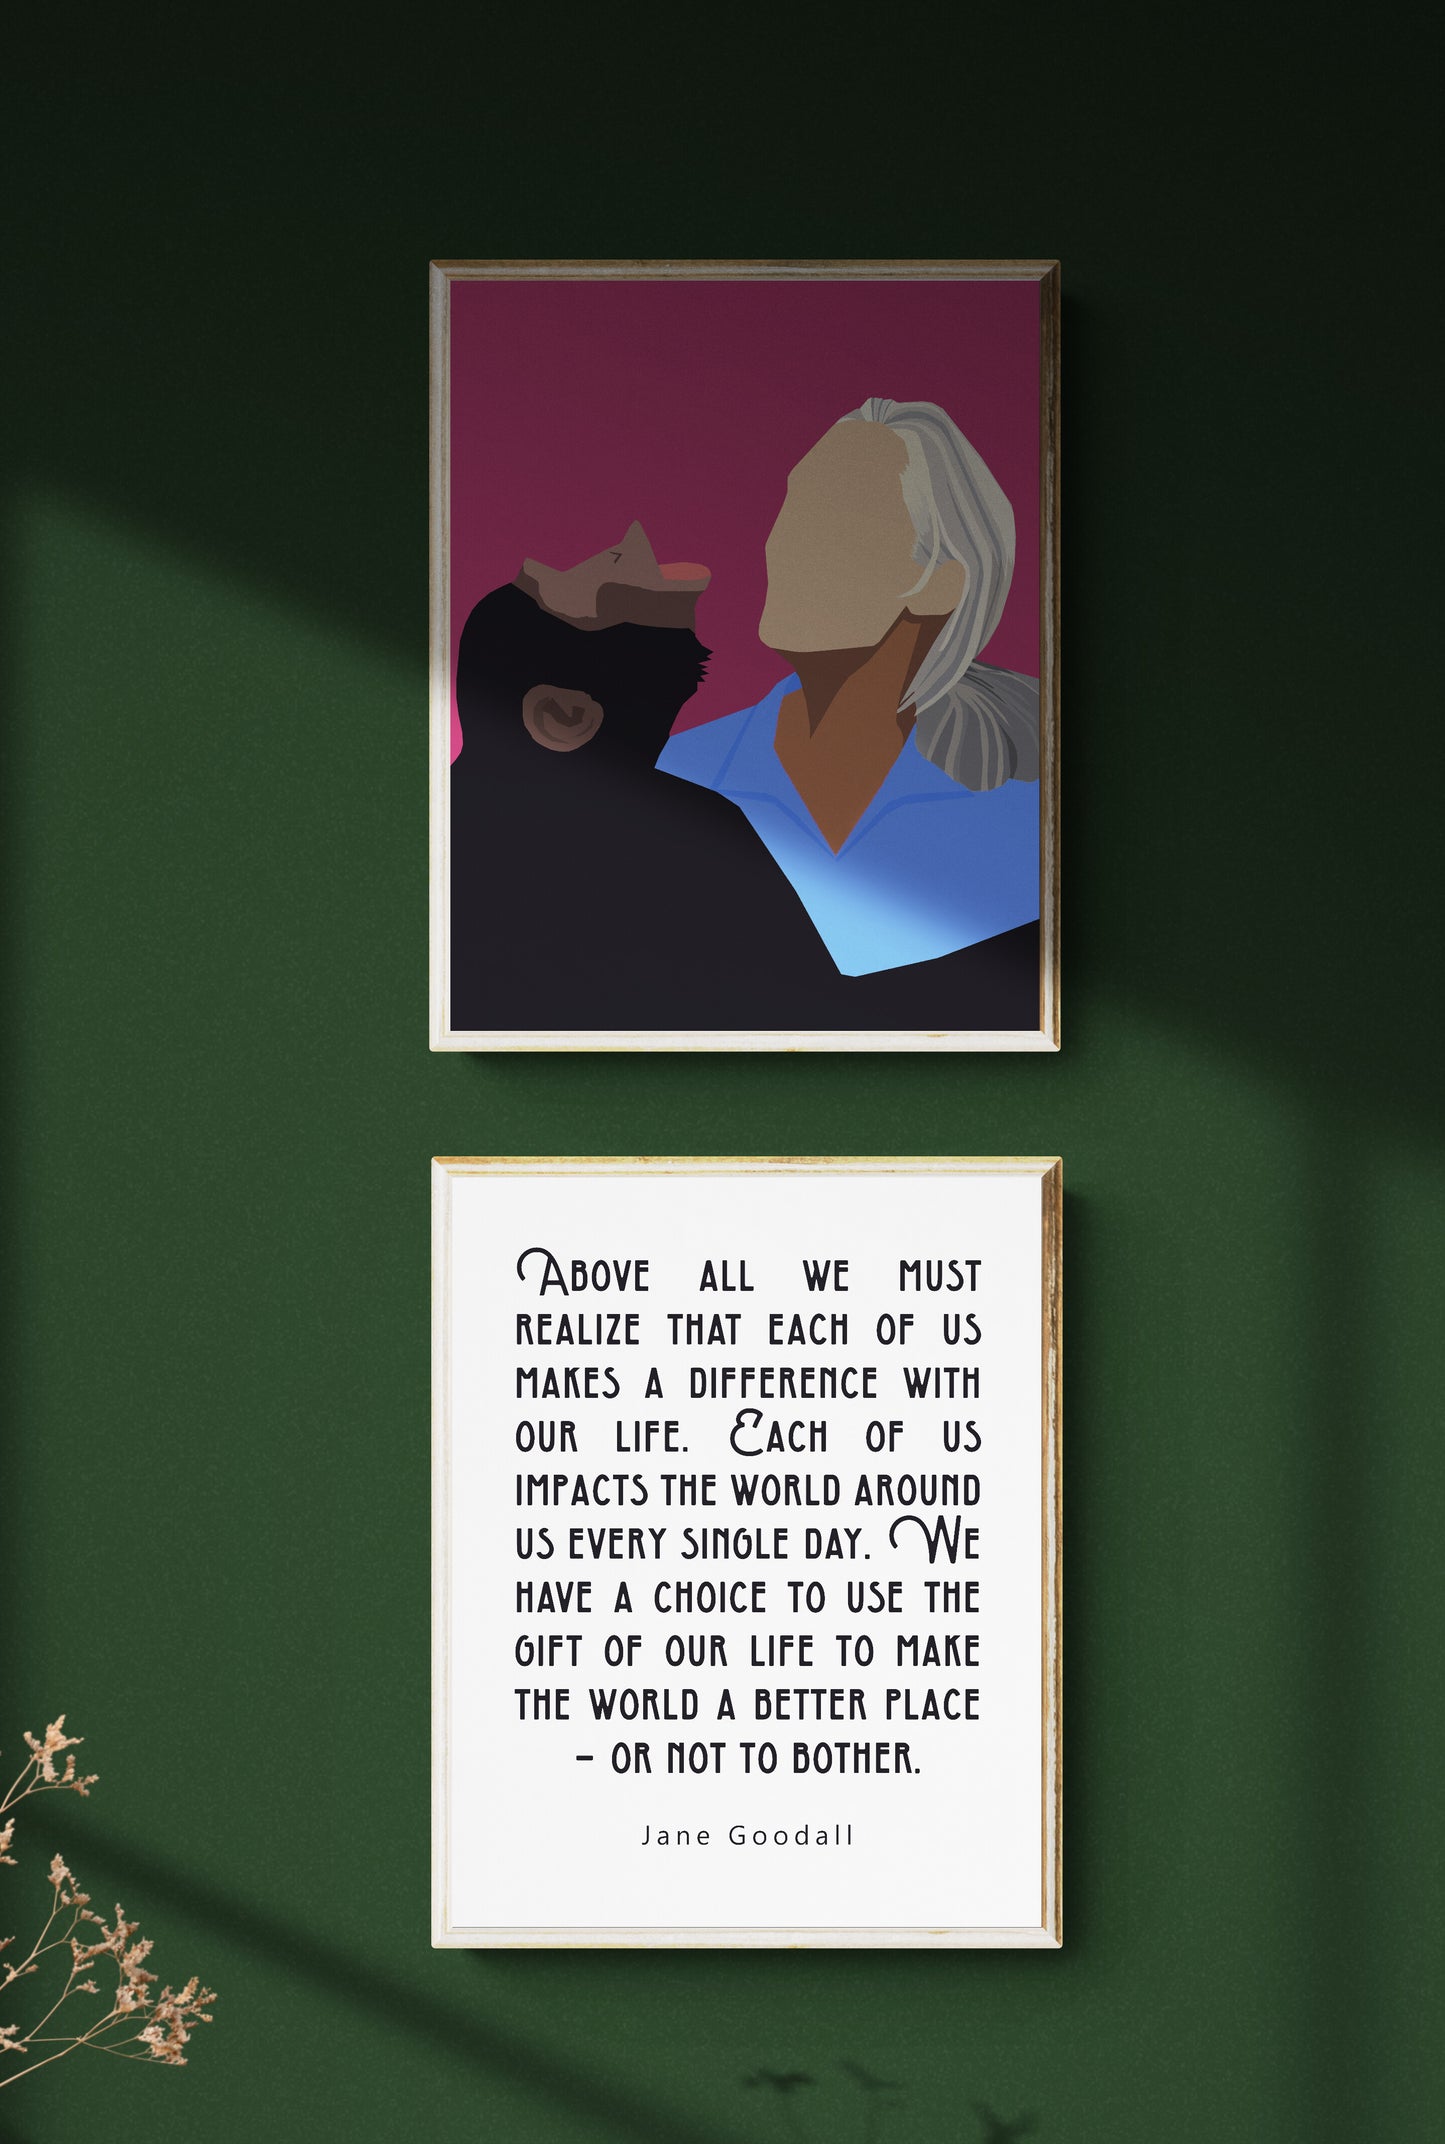 Jane Goodall with Chimpanzee Art and Quote Set